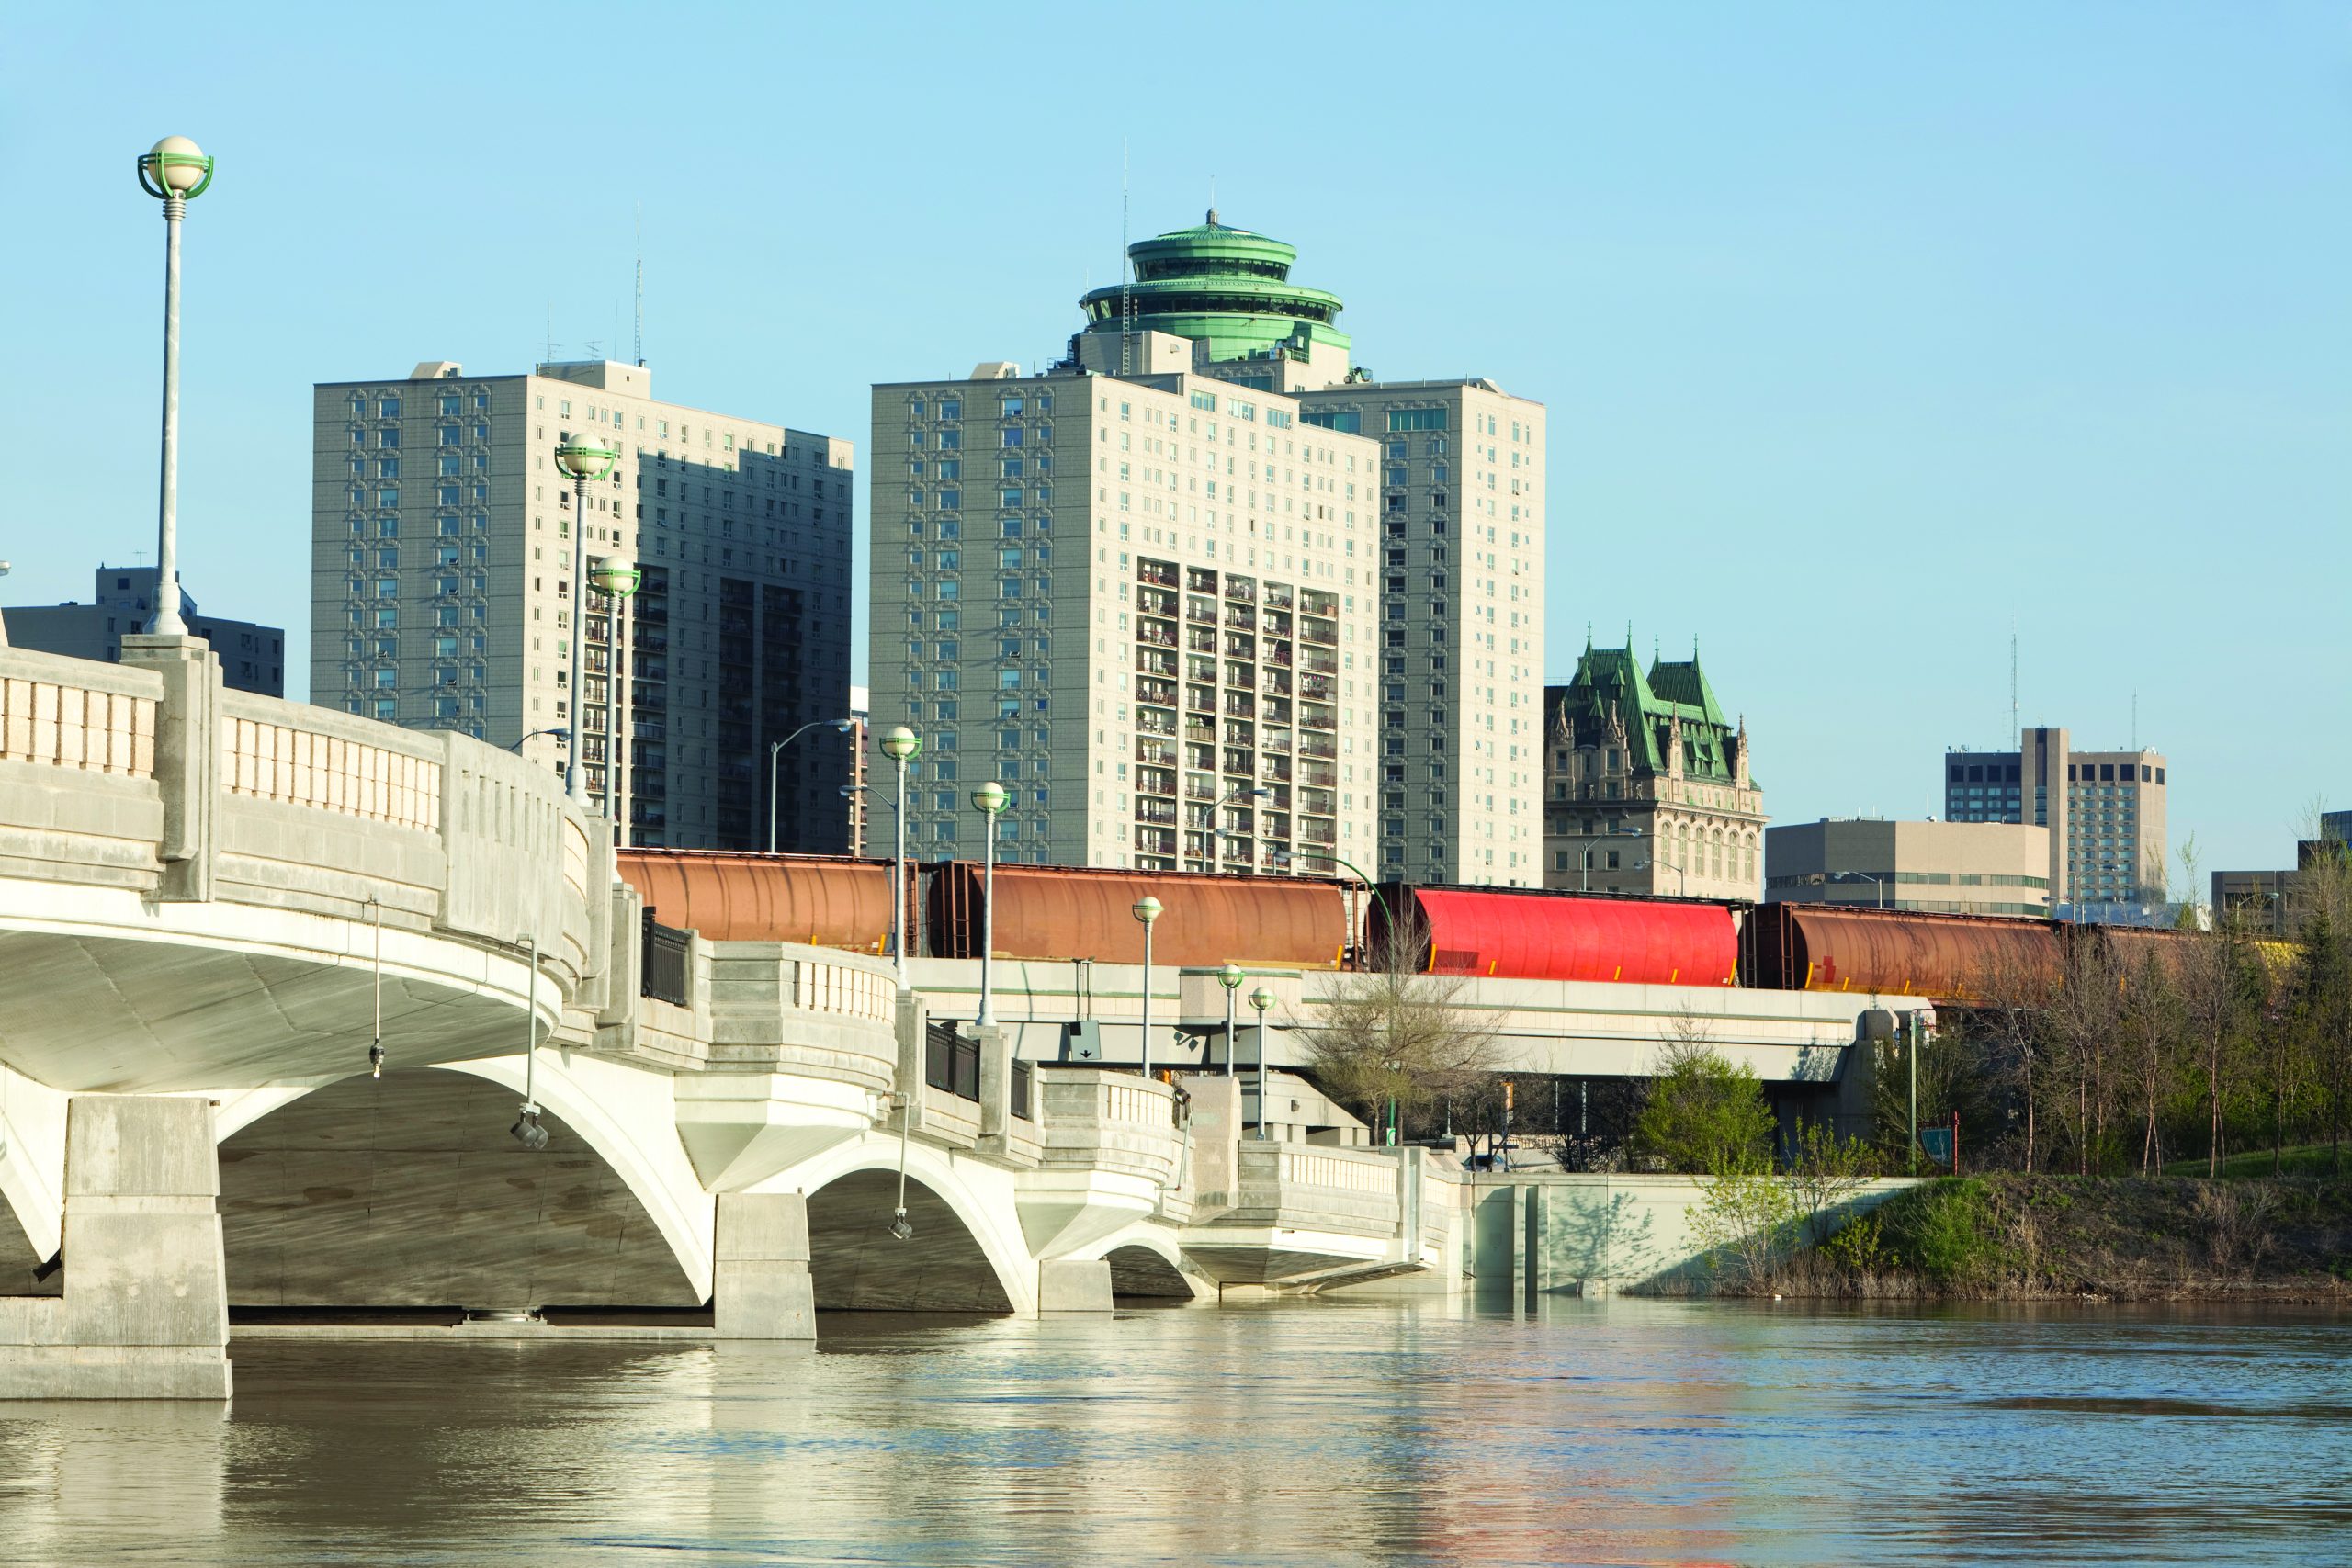 A view of Winnipeg during the daytime